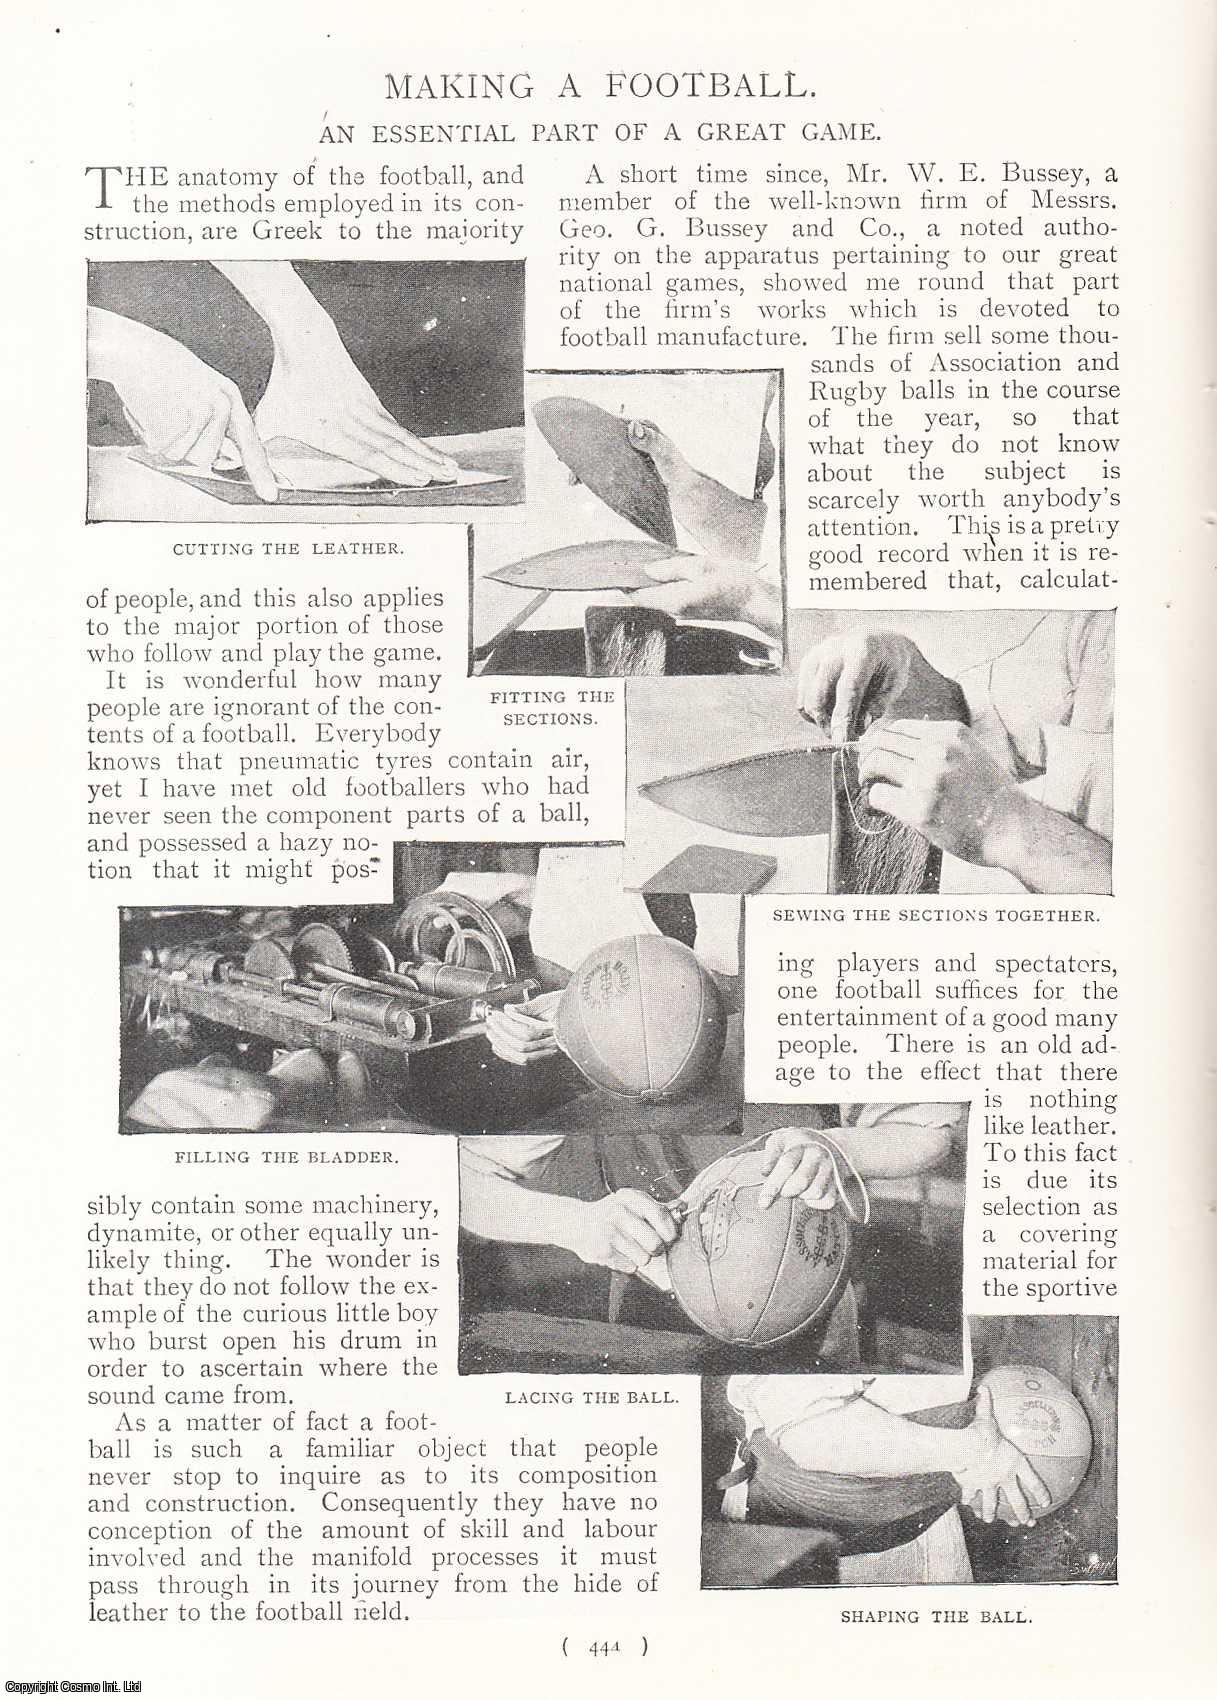 No Author Stated - Making A Football. An Essential Part Of A Great Game. An uncommon original article from the Harmsworth London Magazine, 1898.